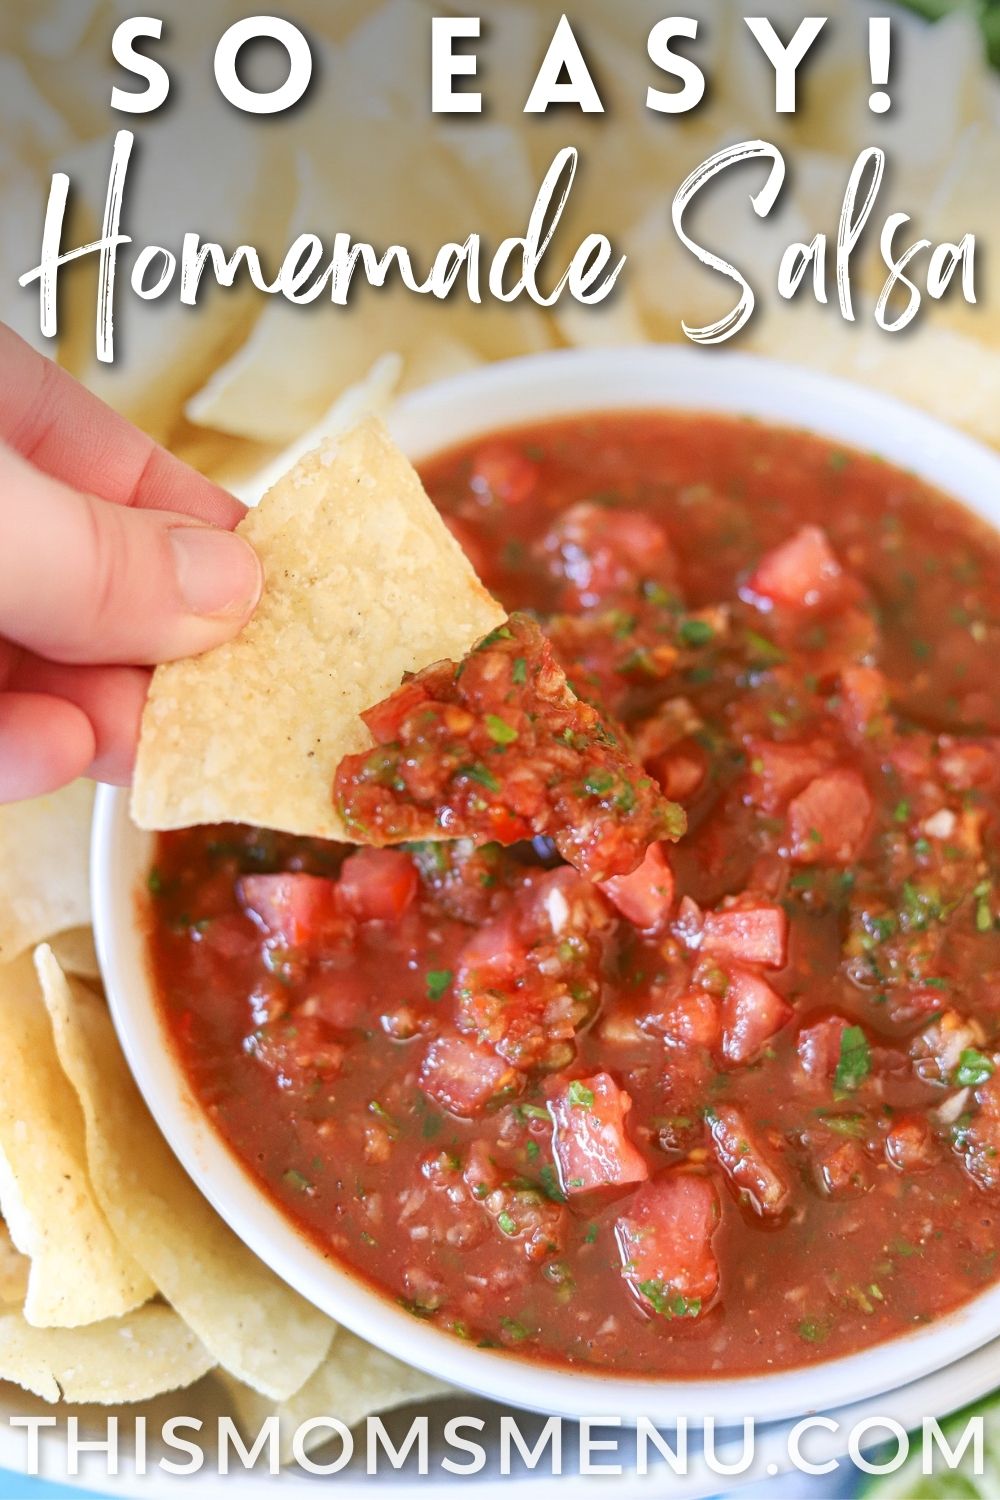 A white bowl full of homemade salsa with one tortilla chip being dipped into the salsa